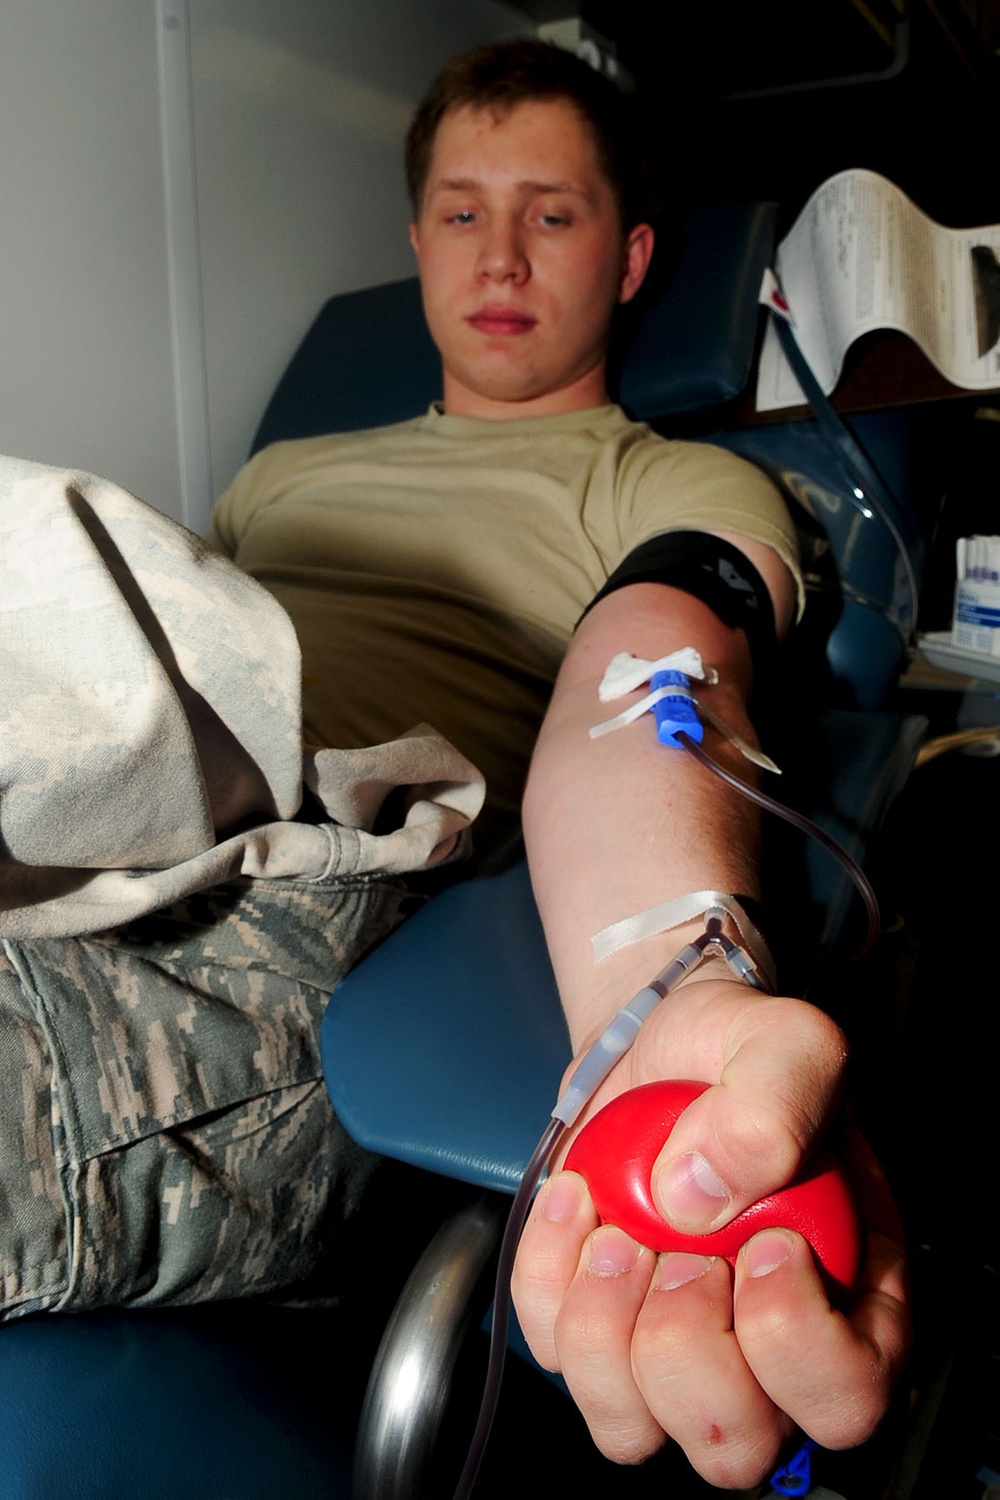 JBLE personnel give blood